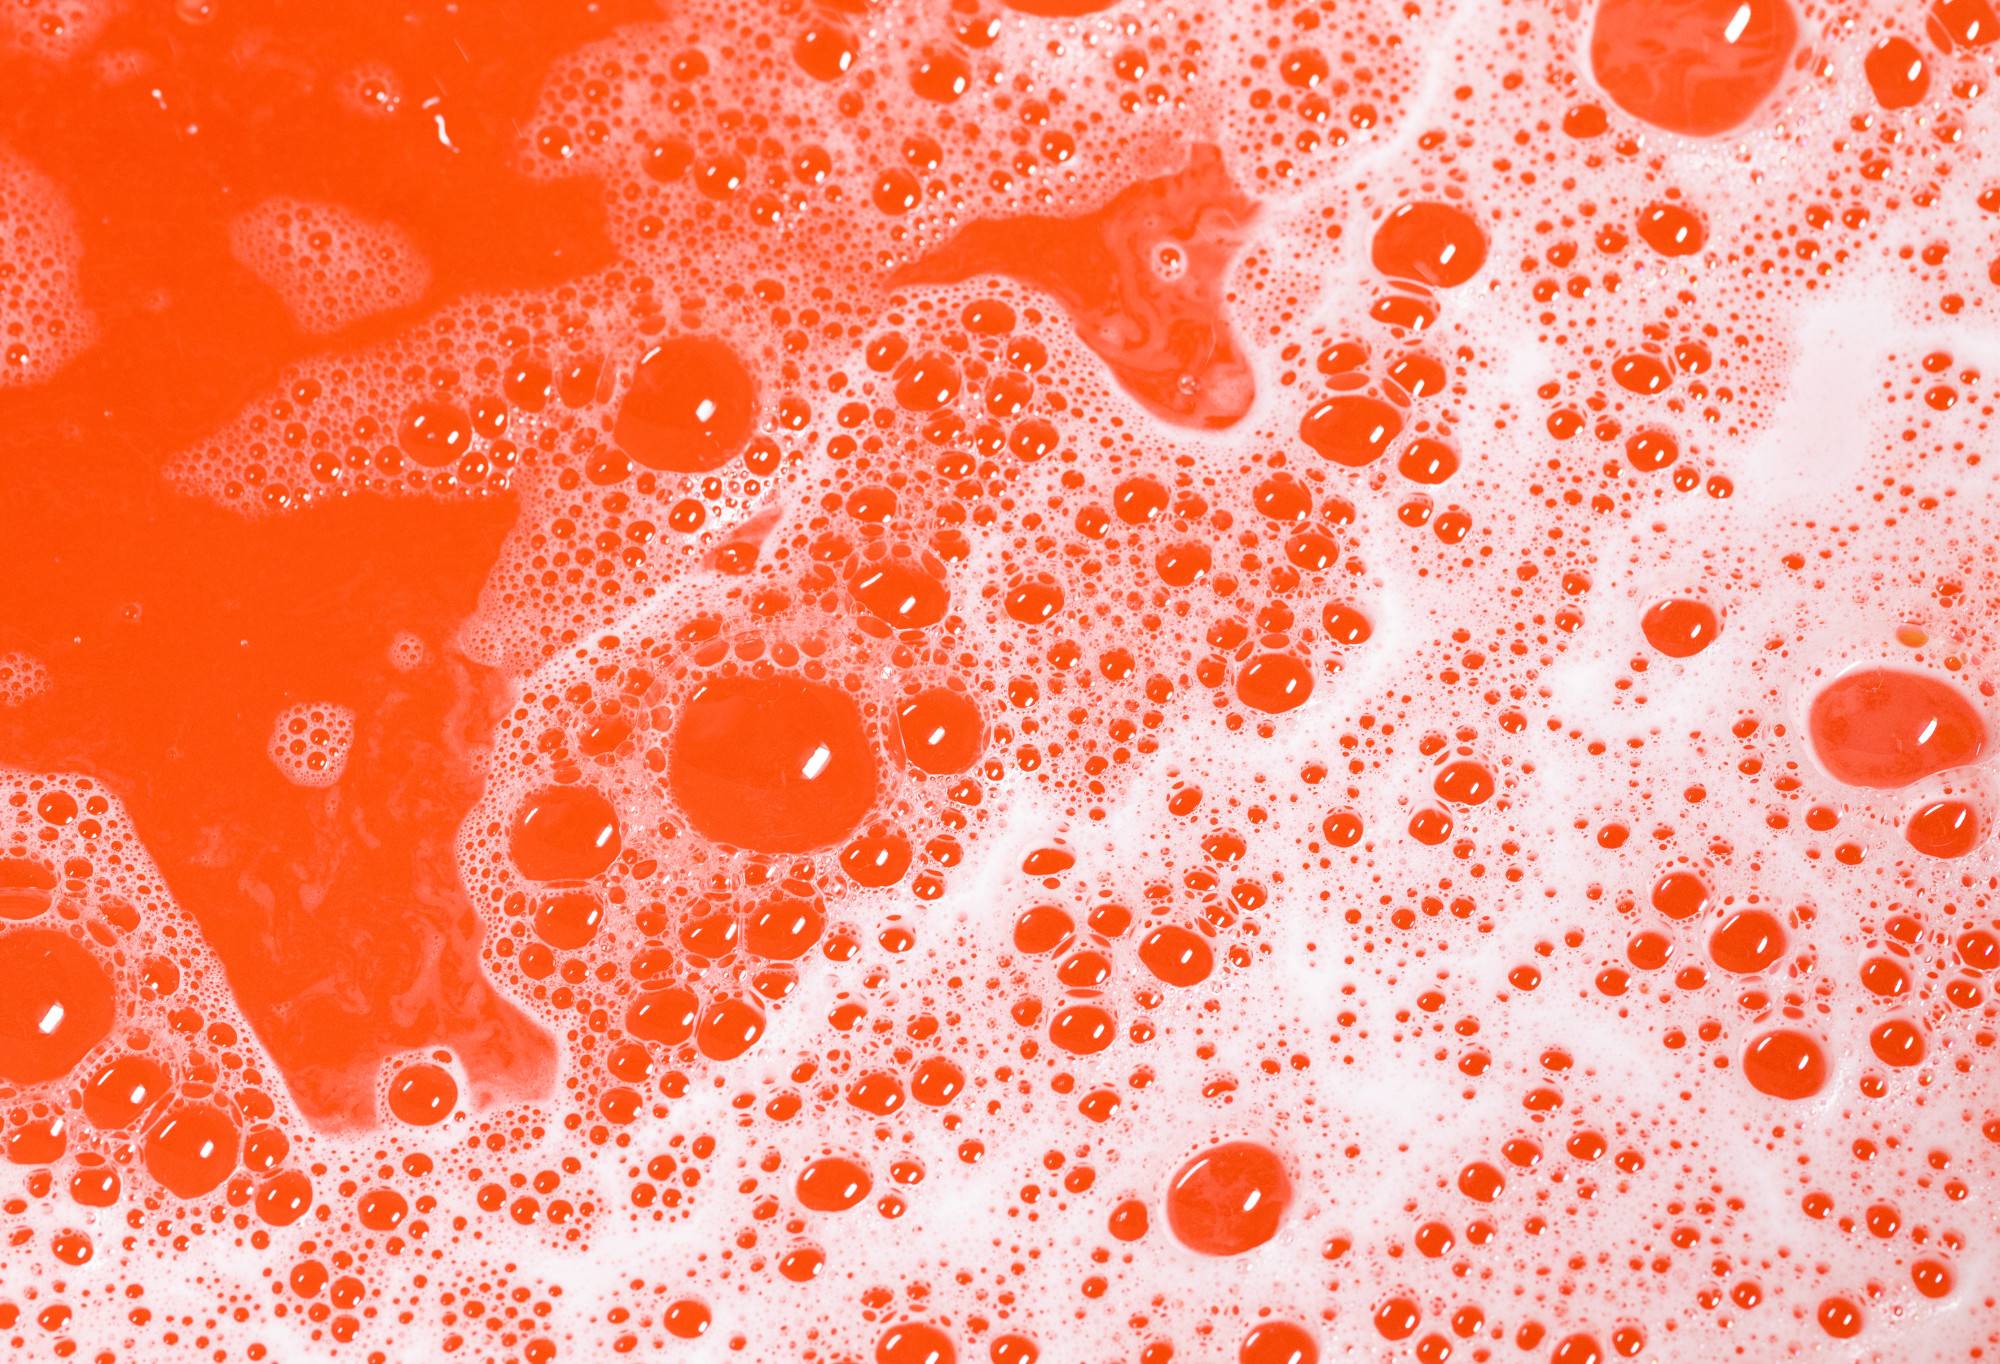 Vivid red water with a covering of bubbles of all different sizes, dotted in white foam.